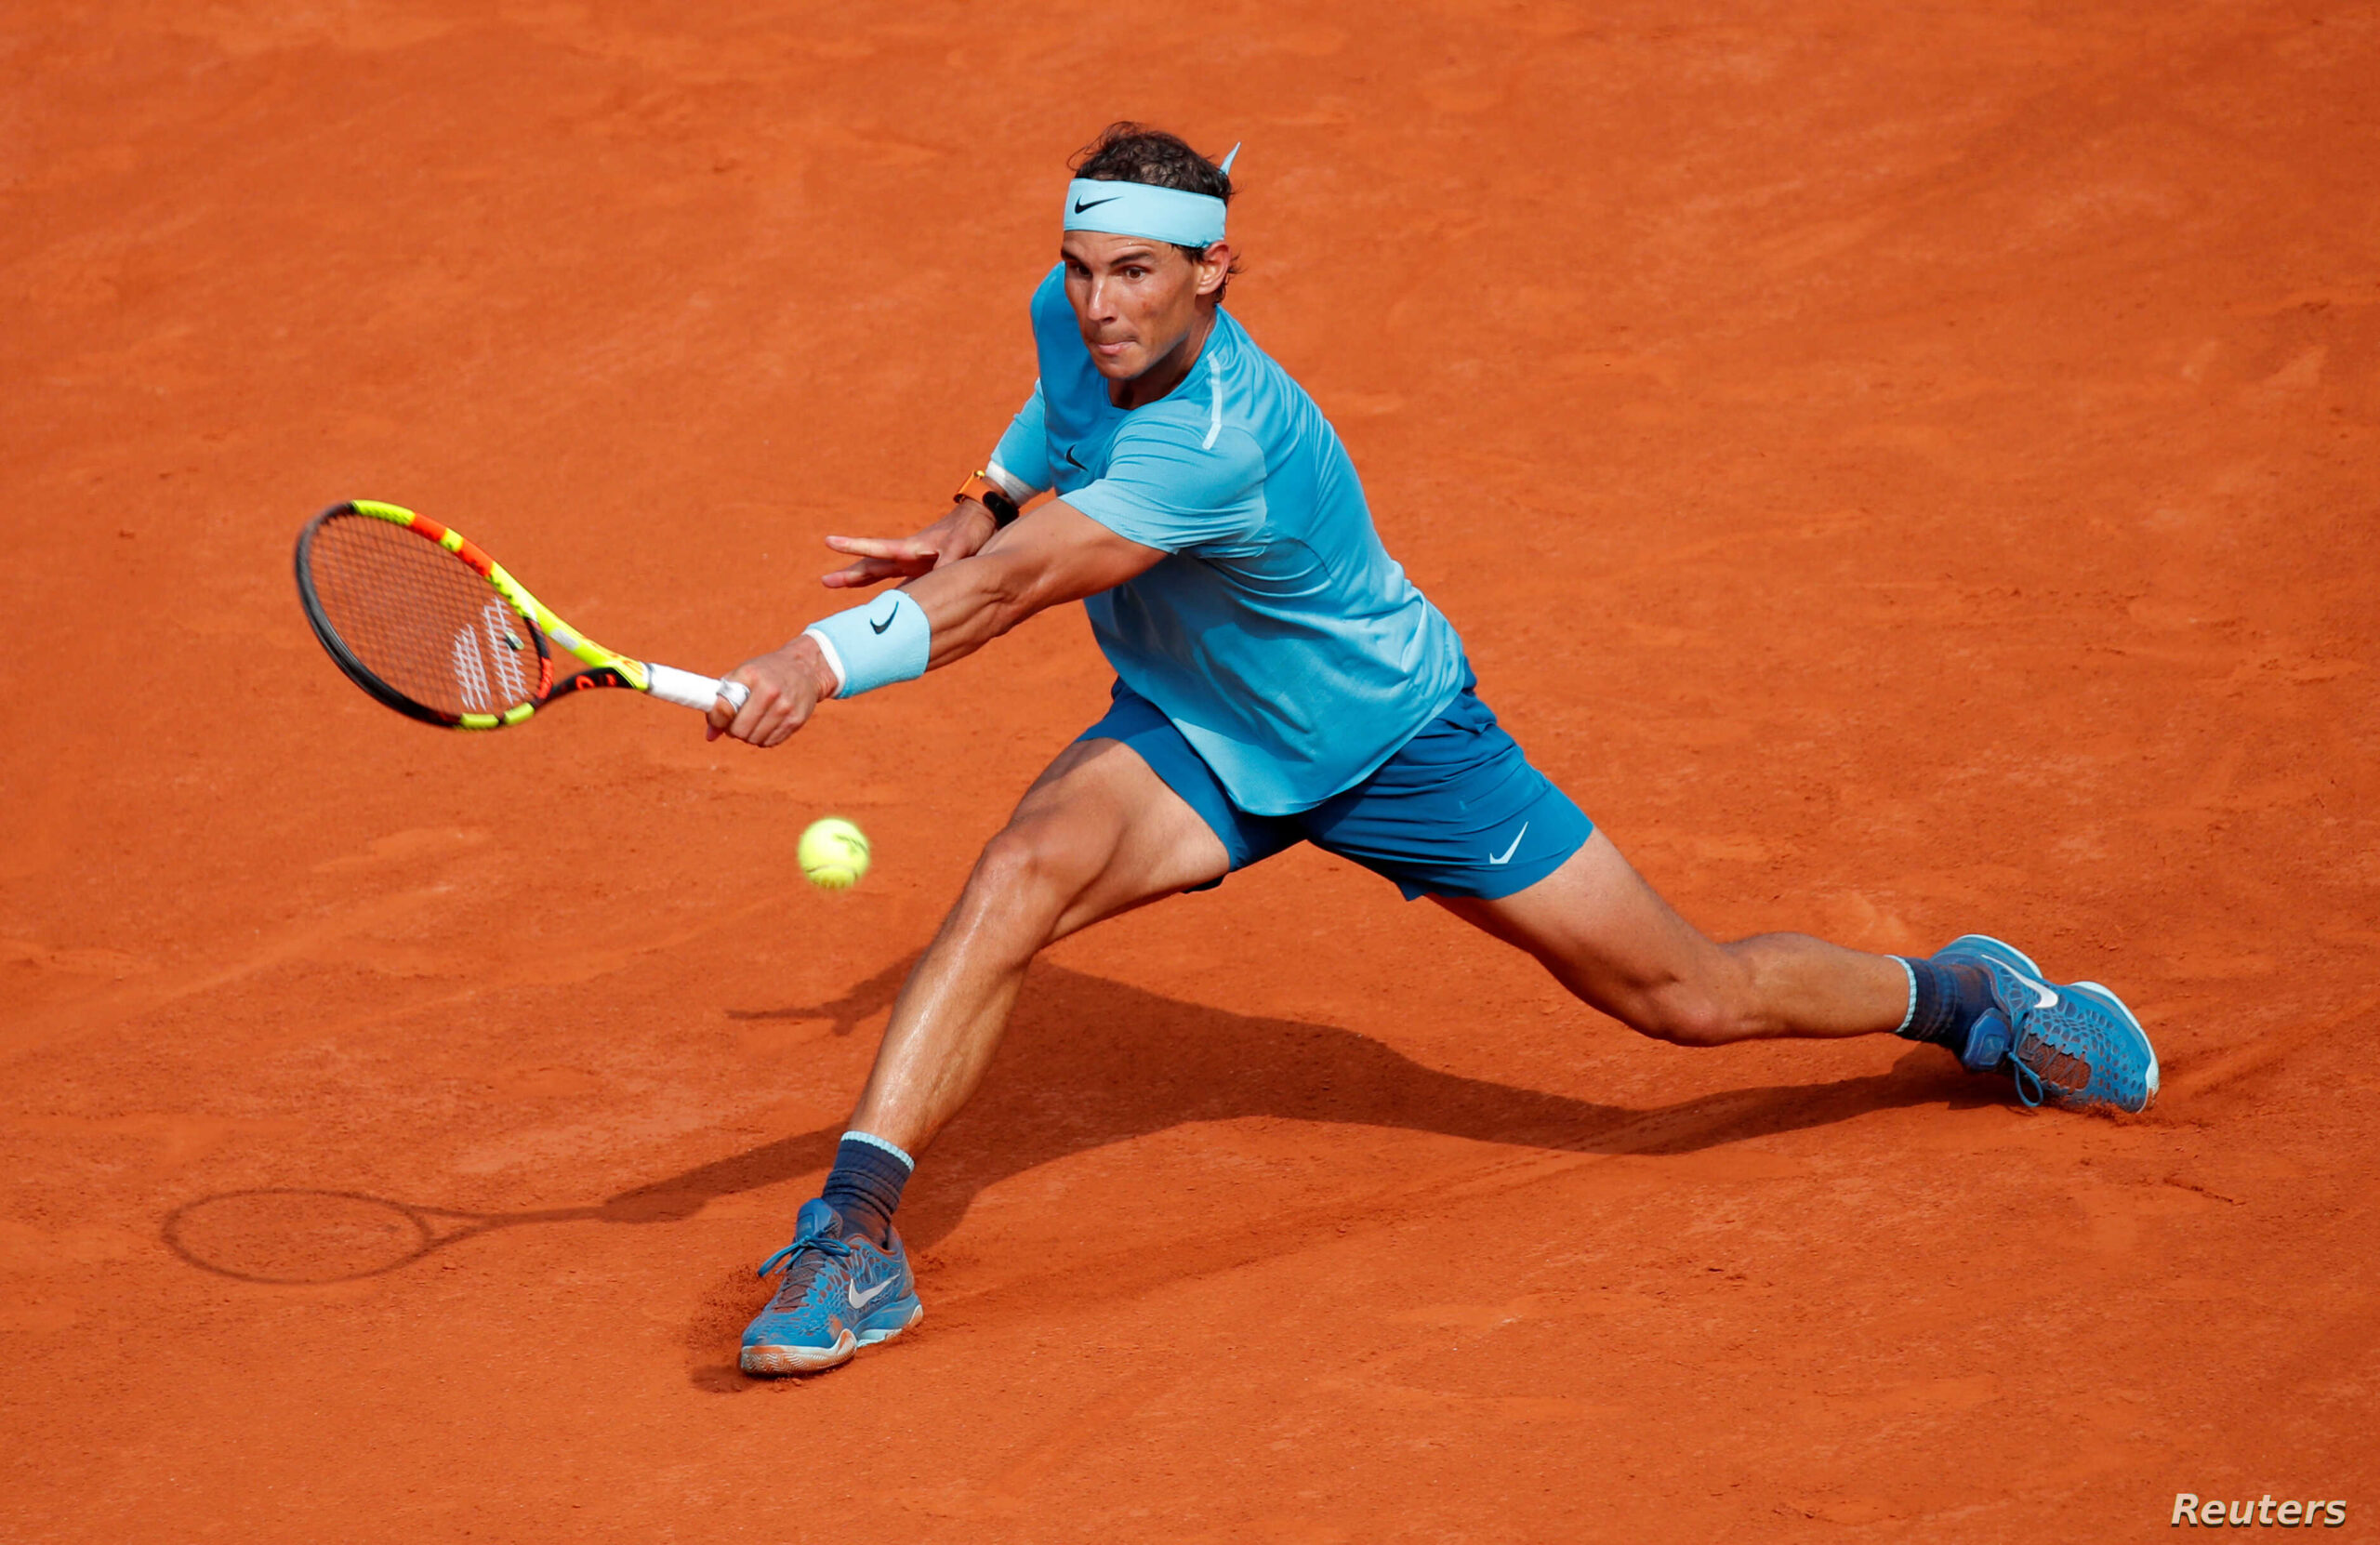 Rafa Nadal Suffers Upset On Clay To Rublev World Top News Ng